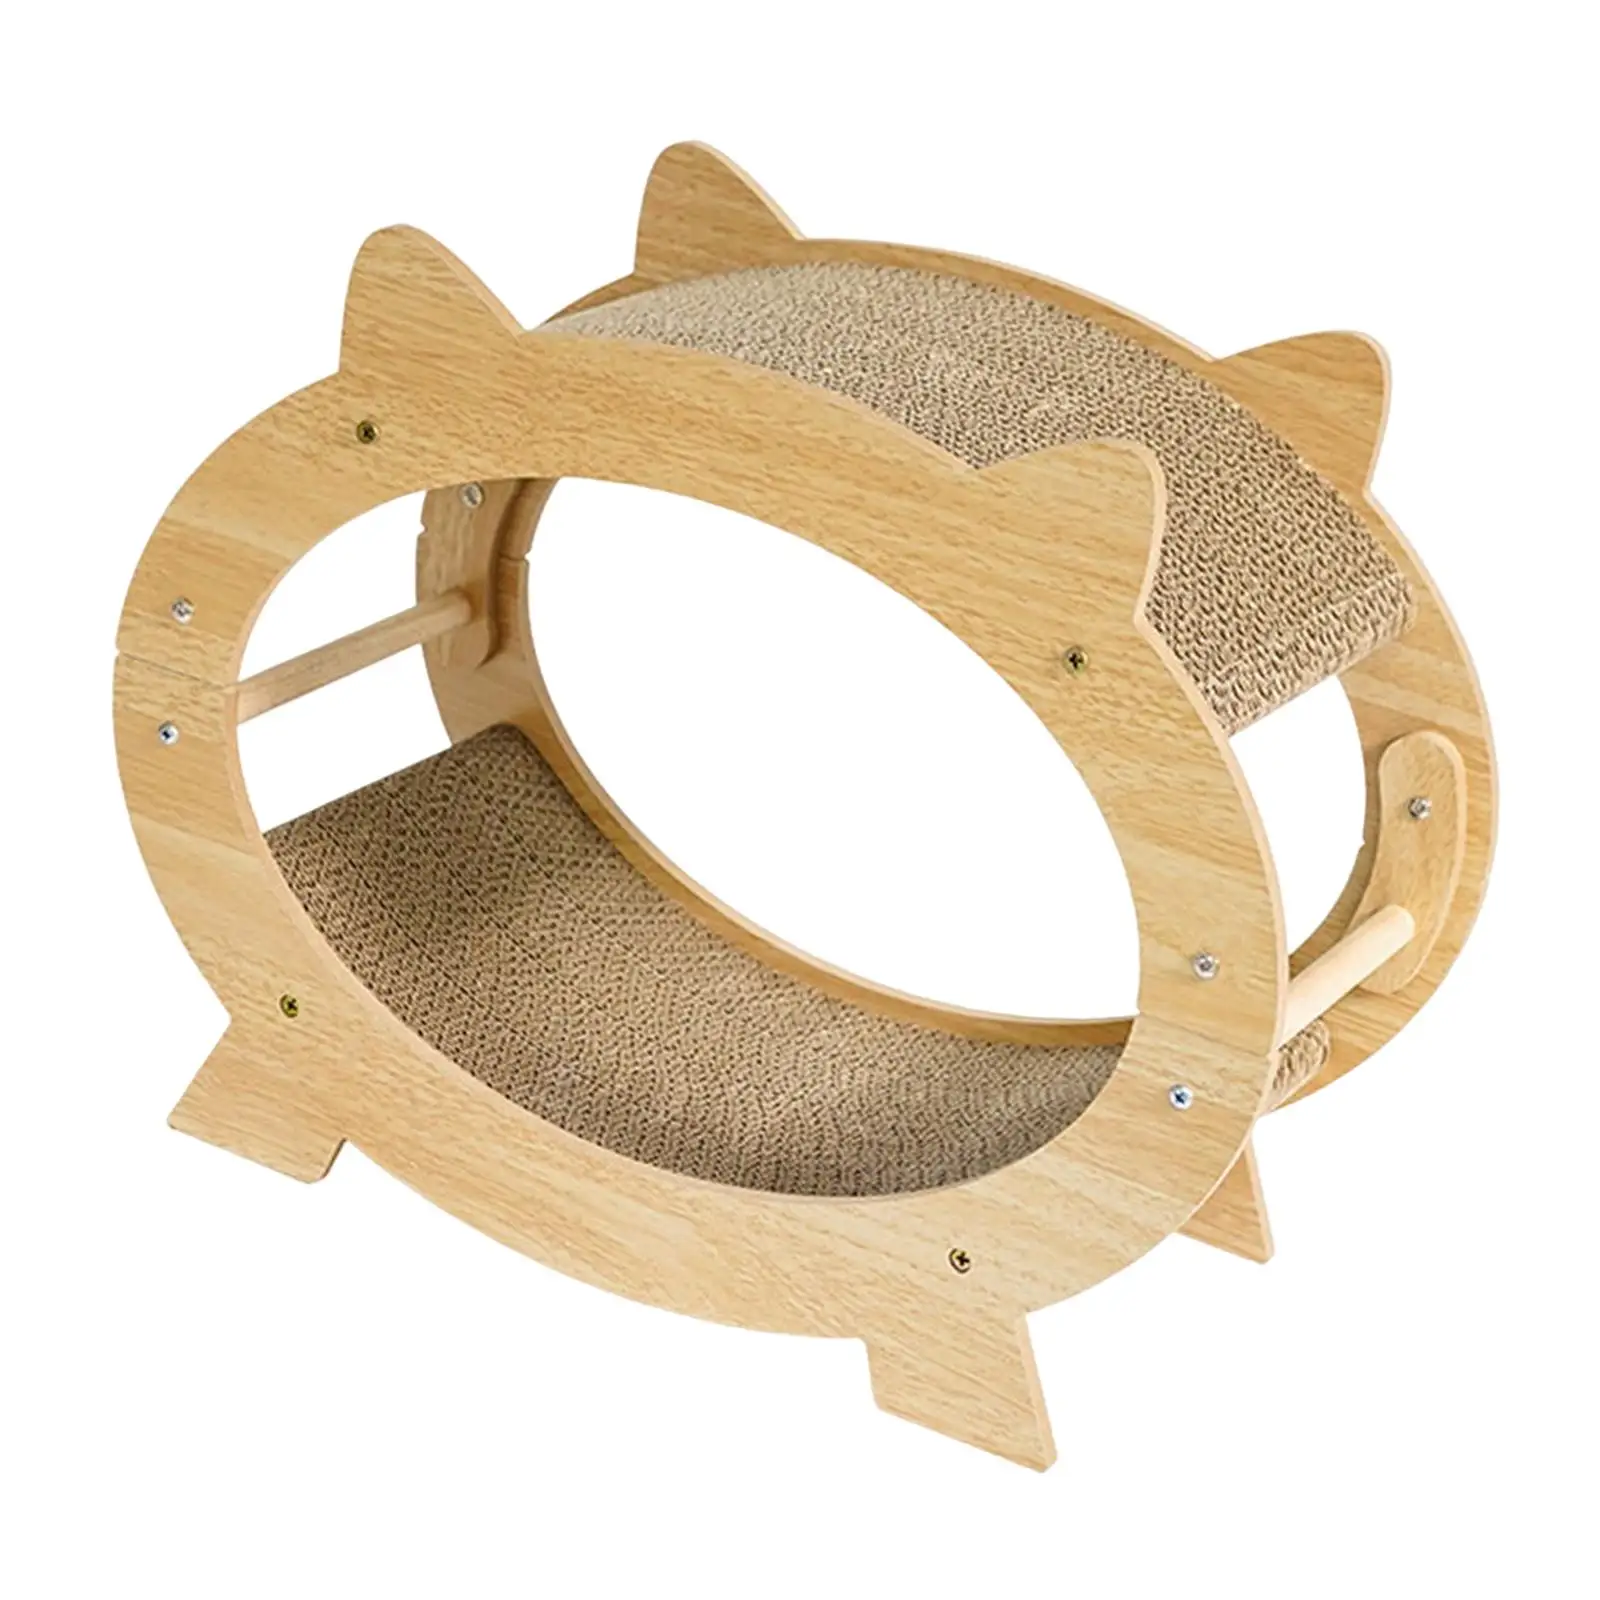 Cat Scratcher Board Bed Interactive Play Toy Wear Resistant Grinding Claw Cat Bed Scratching Pad for Kitten Pet Accessories